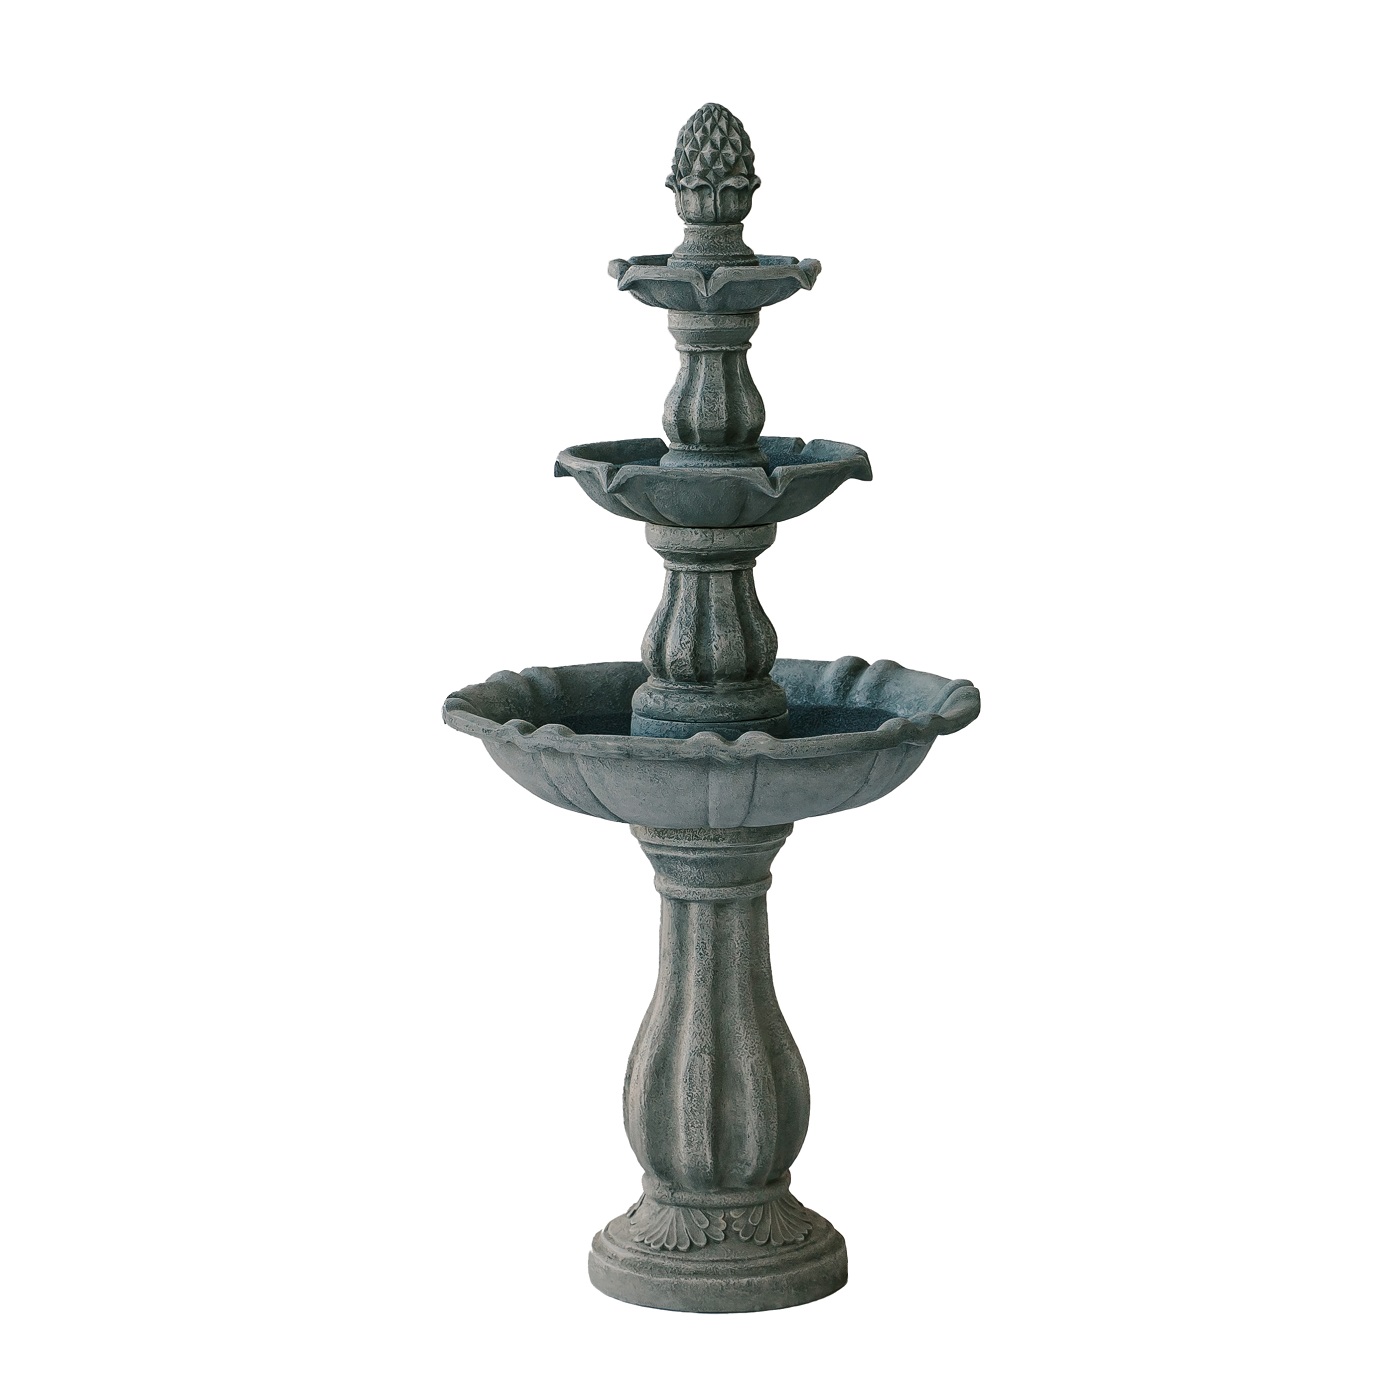 Enhance your indoor/outdoor décor with a classic 3 tier garden fountain featuring cascading waterfall. Shop now for a stunning addition to your space!